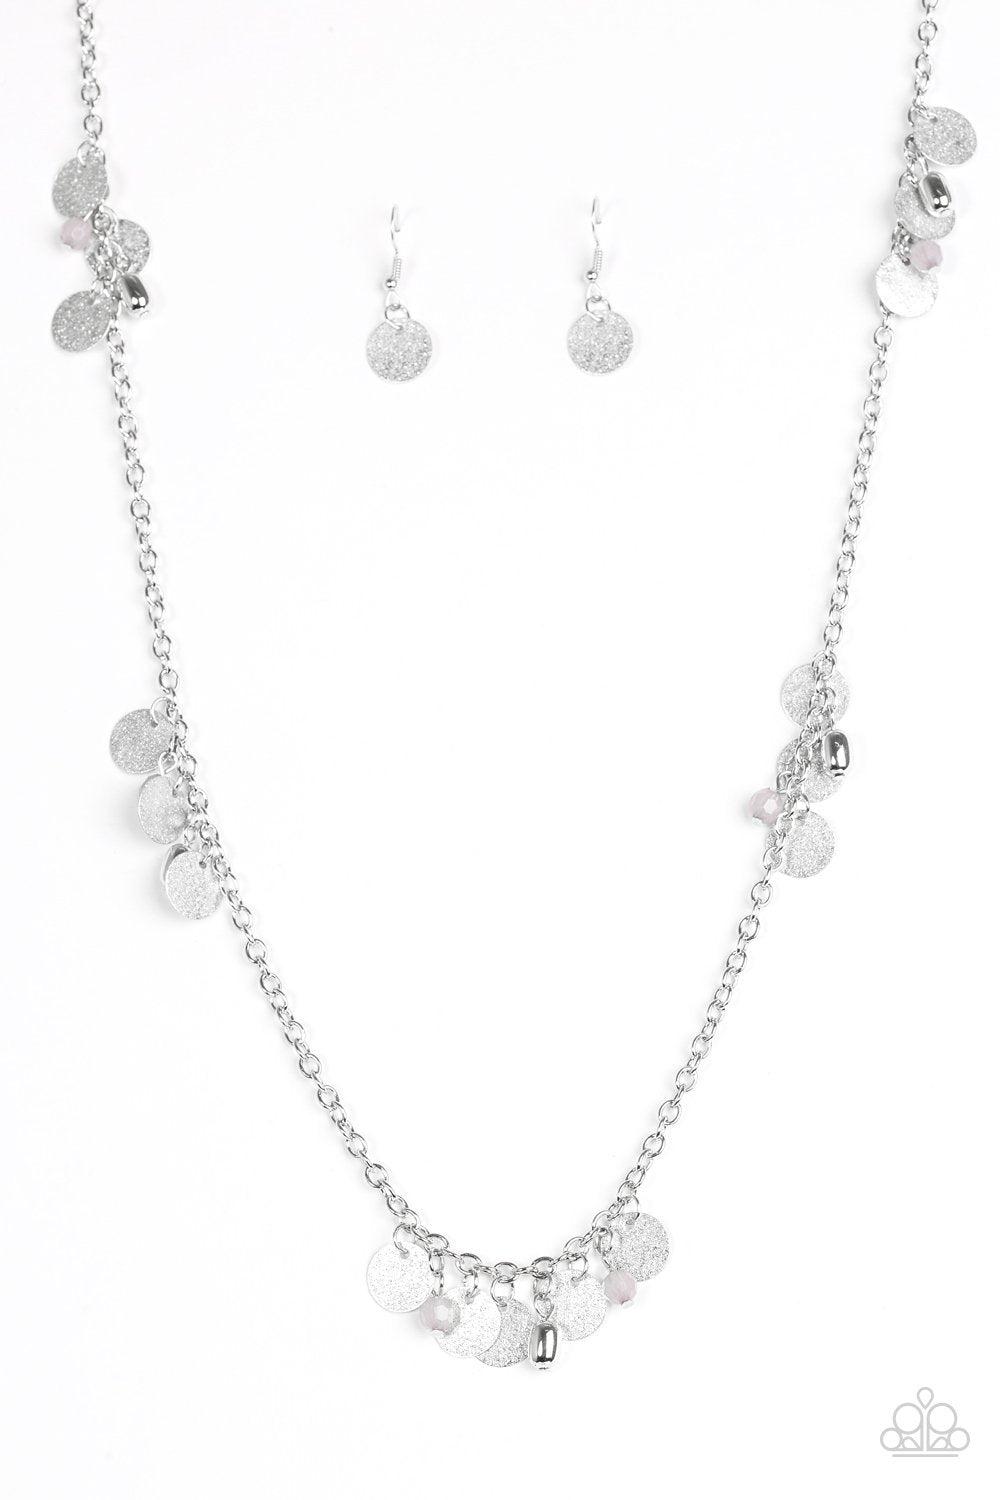 Musical Expression Silver Necklace - Paparazzi Accessories-CarasShop.com - $5 Jewelry by Cara Jewels